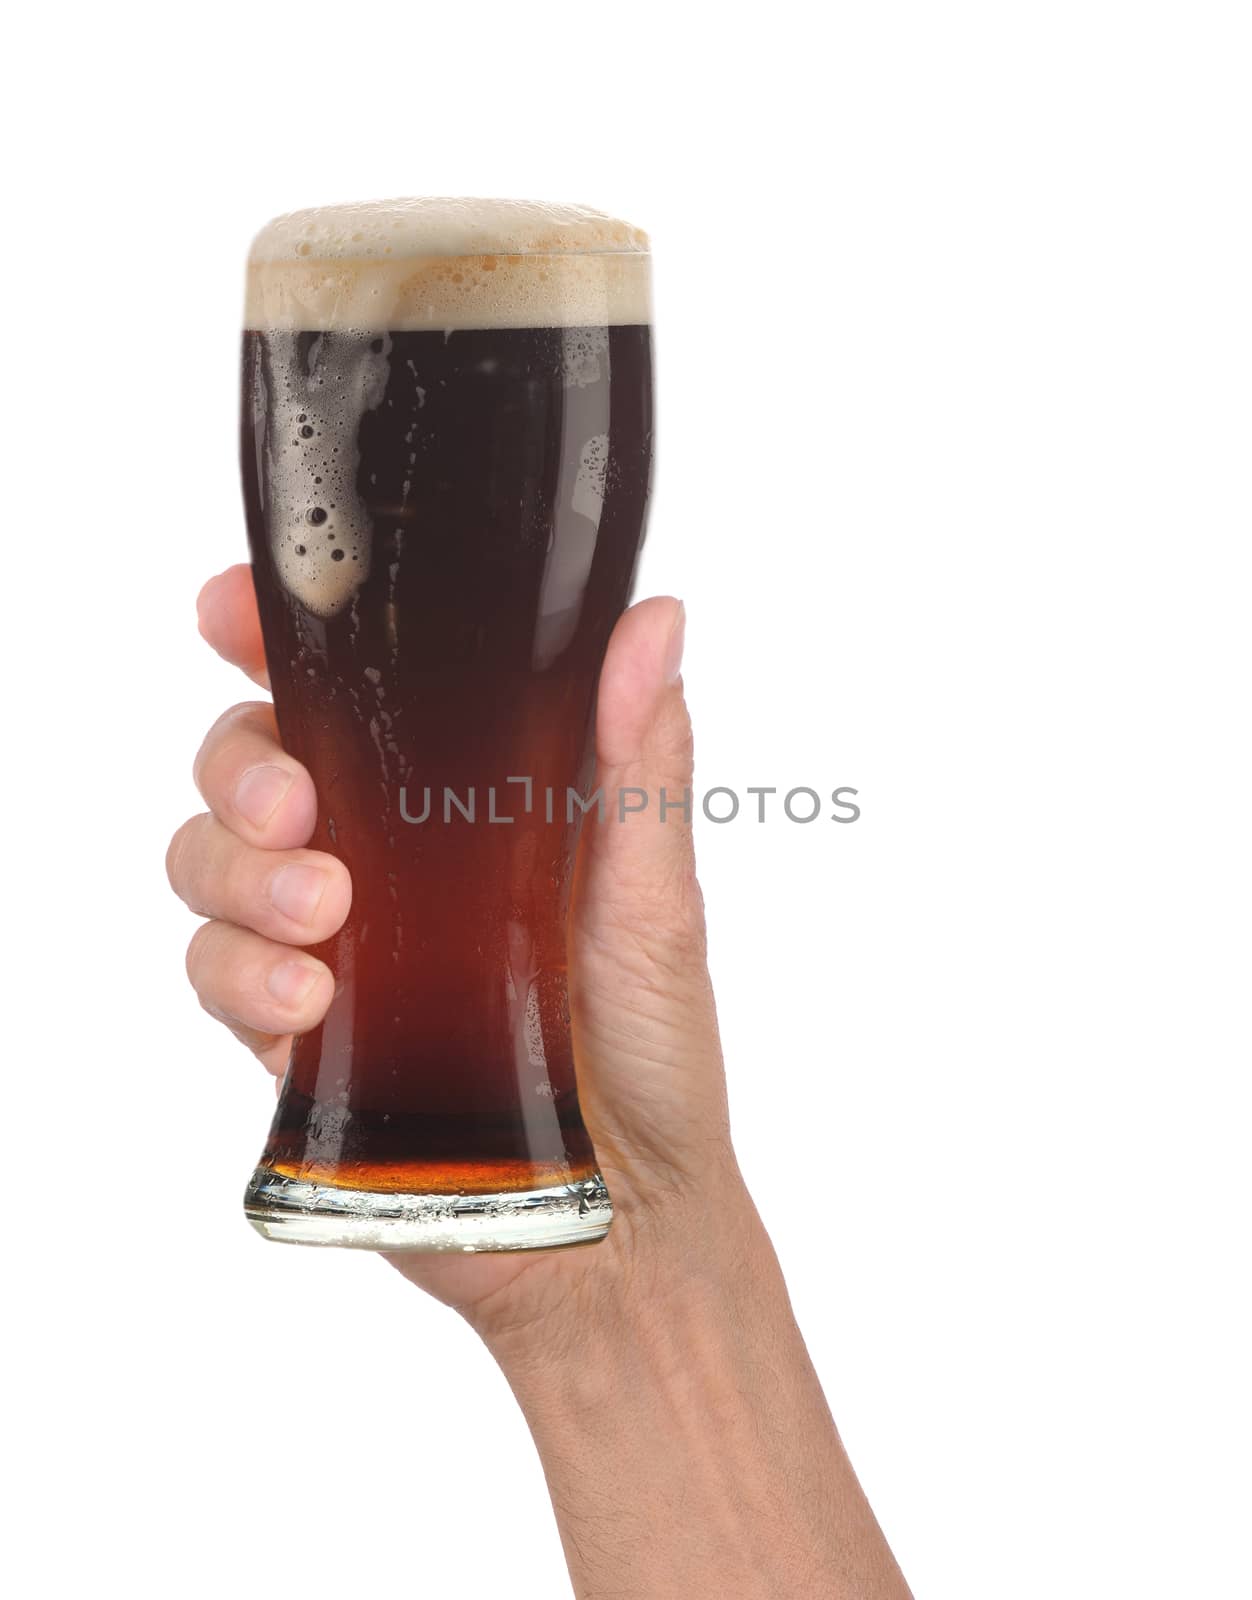 Closeup of a male hand holding up a glass of foamy dark ale over a white background. Vertical format with drip running down the side of the beer glass.